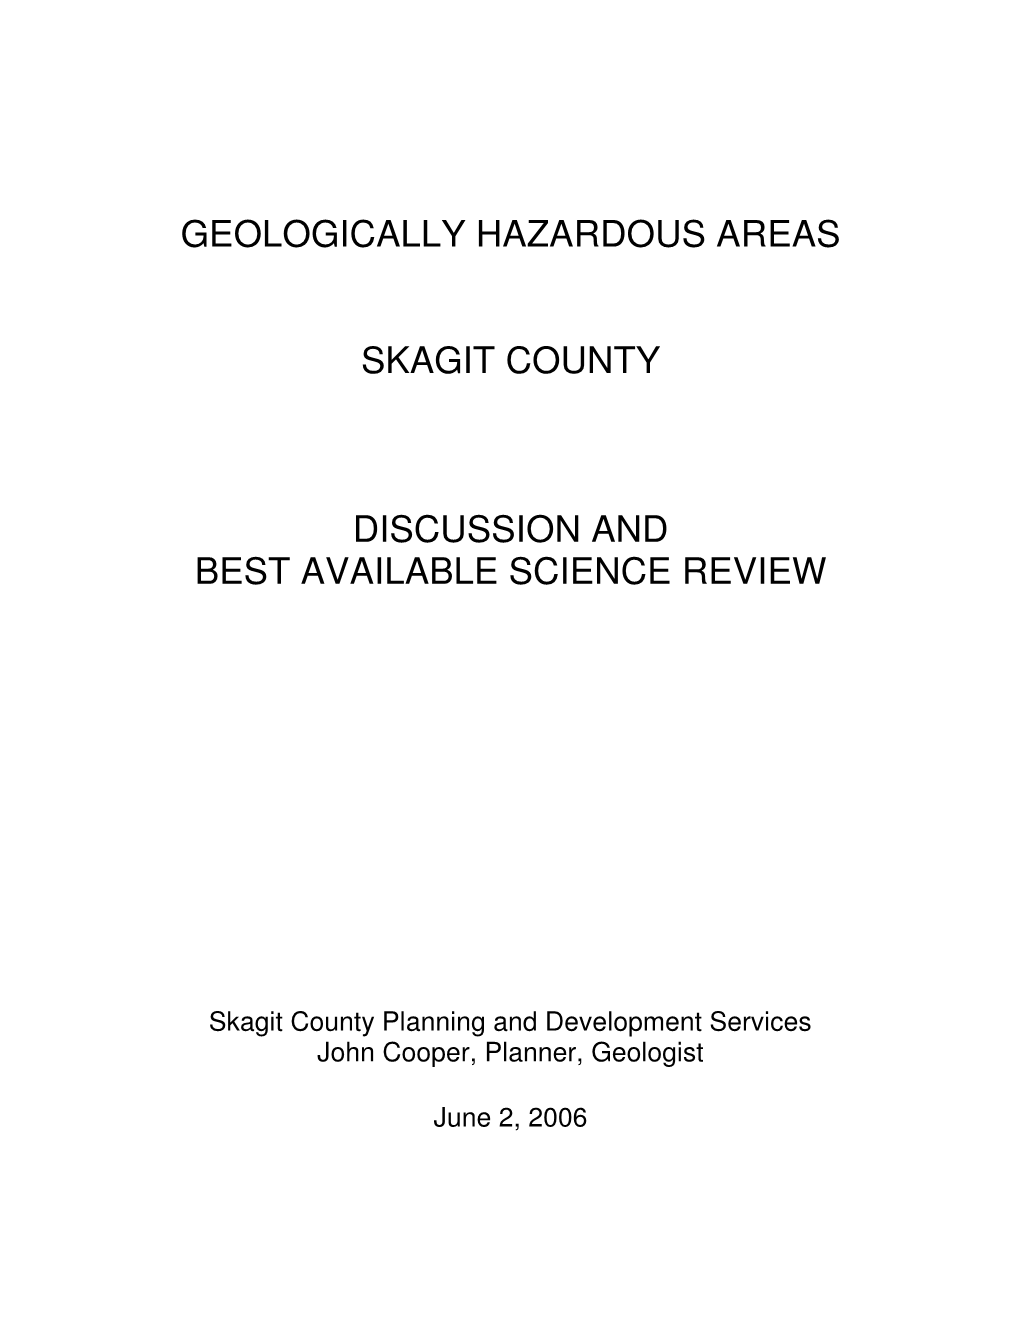 Geologically Hazardous Areas Skagit County Discussion and Best